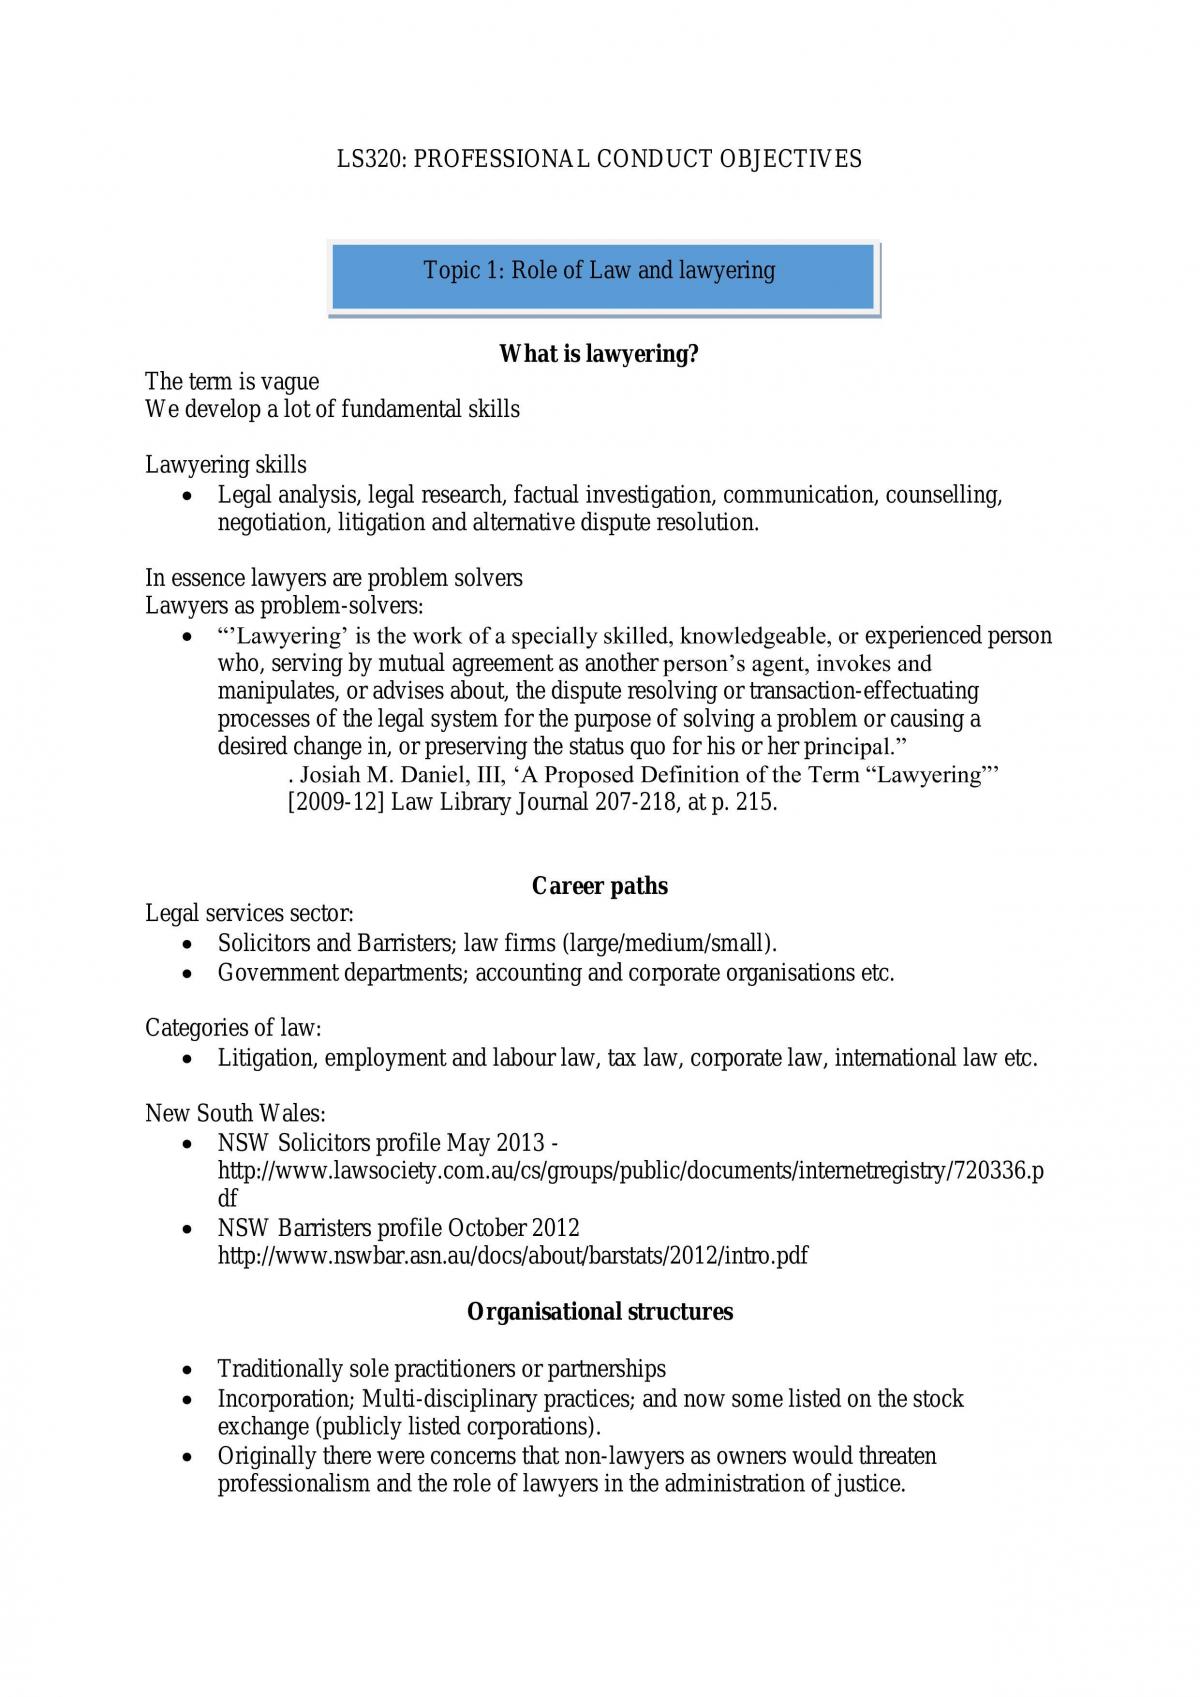 Full notes from LS320 Professional Conduct - Page 1